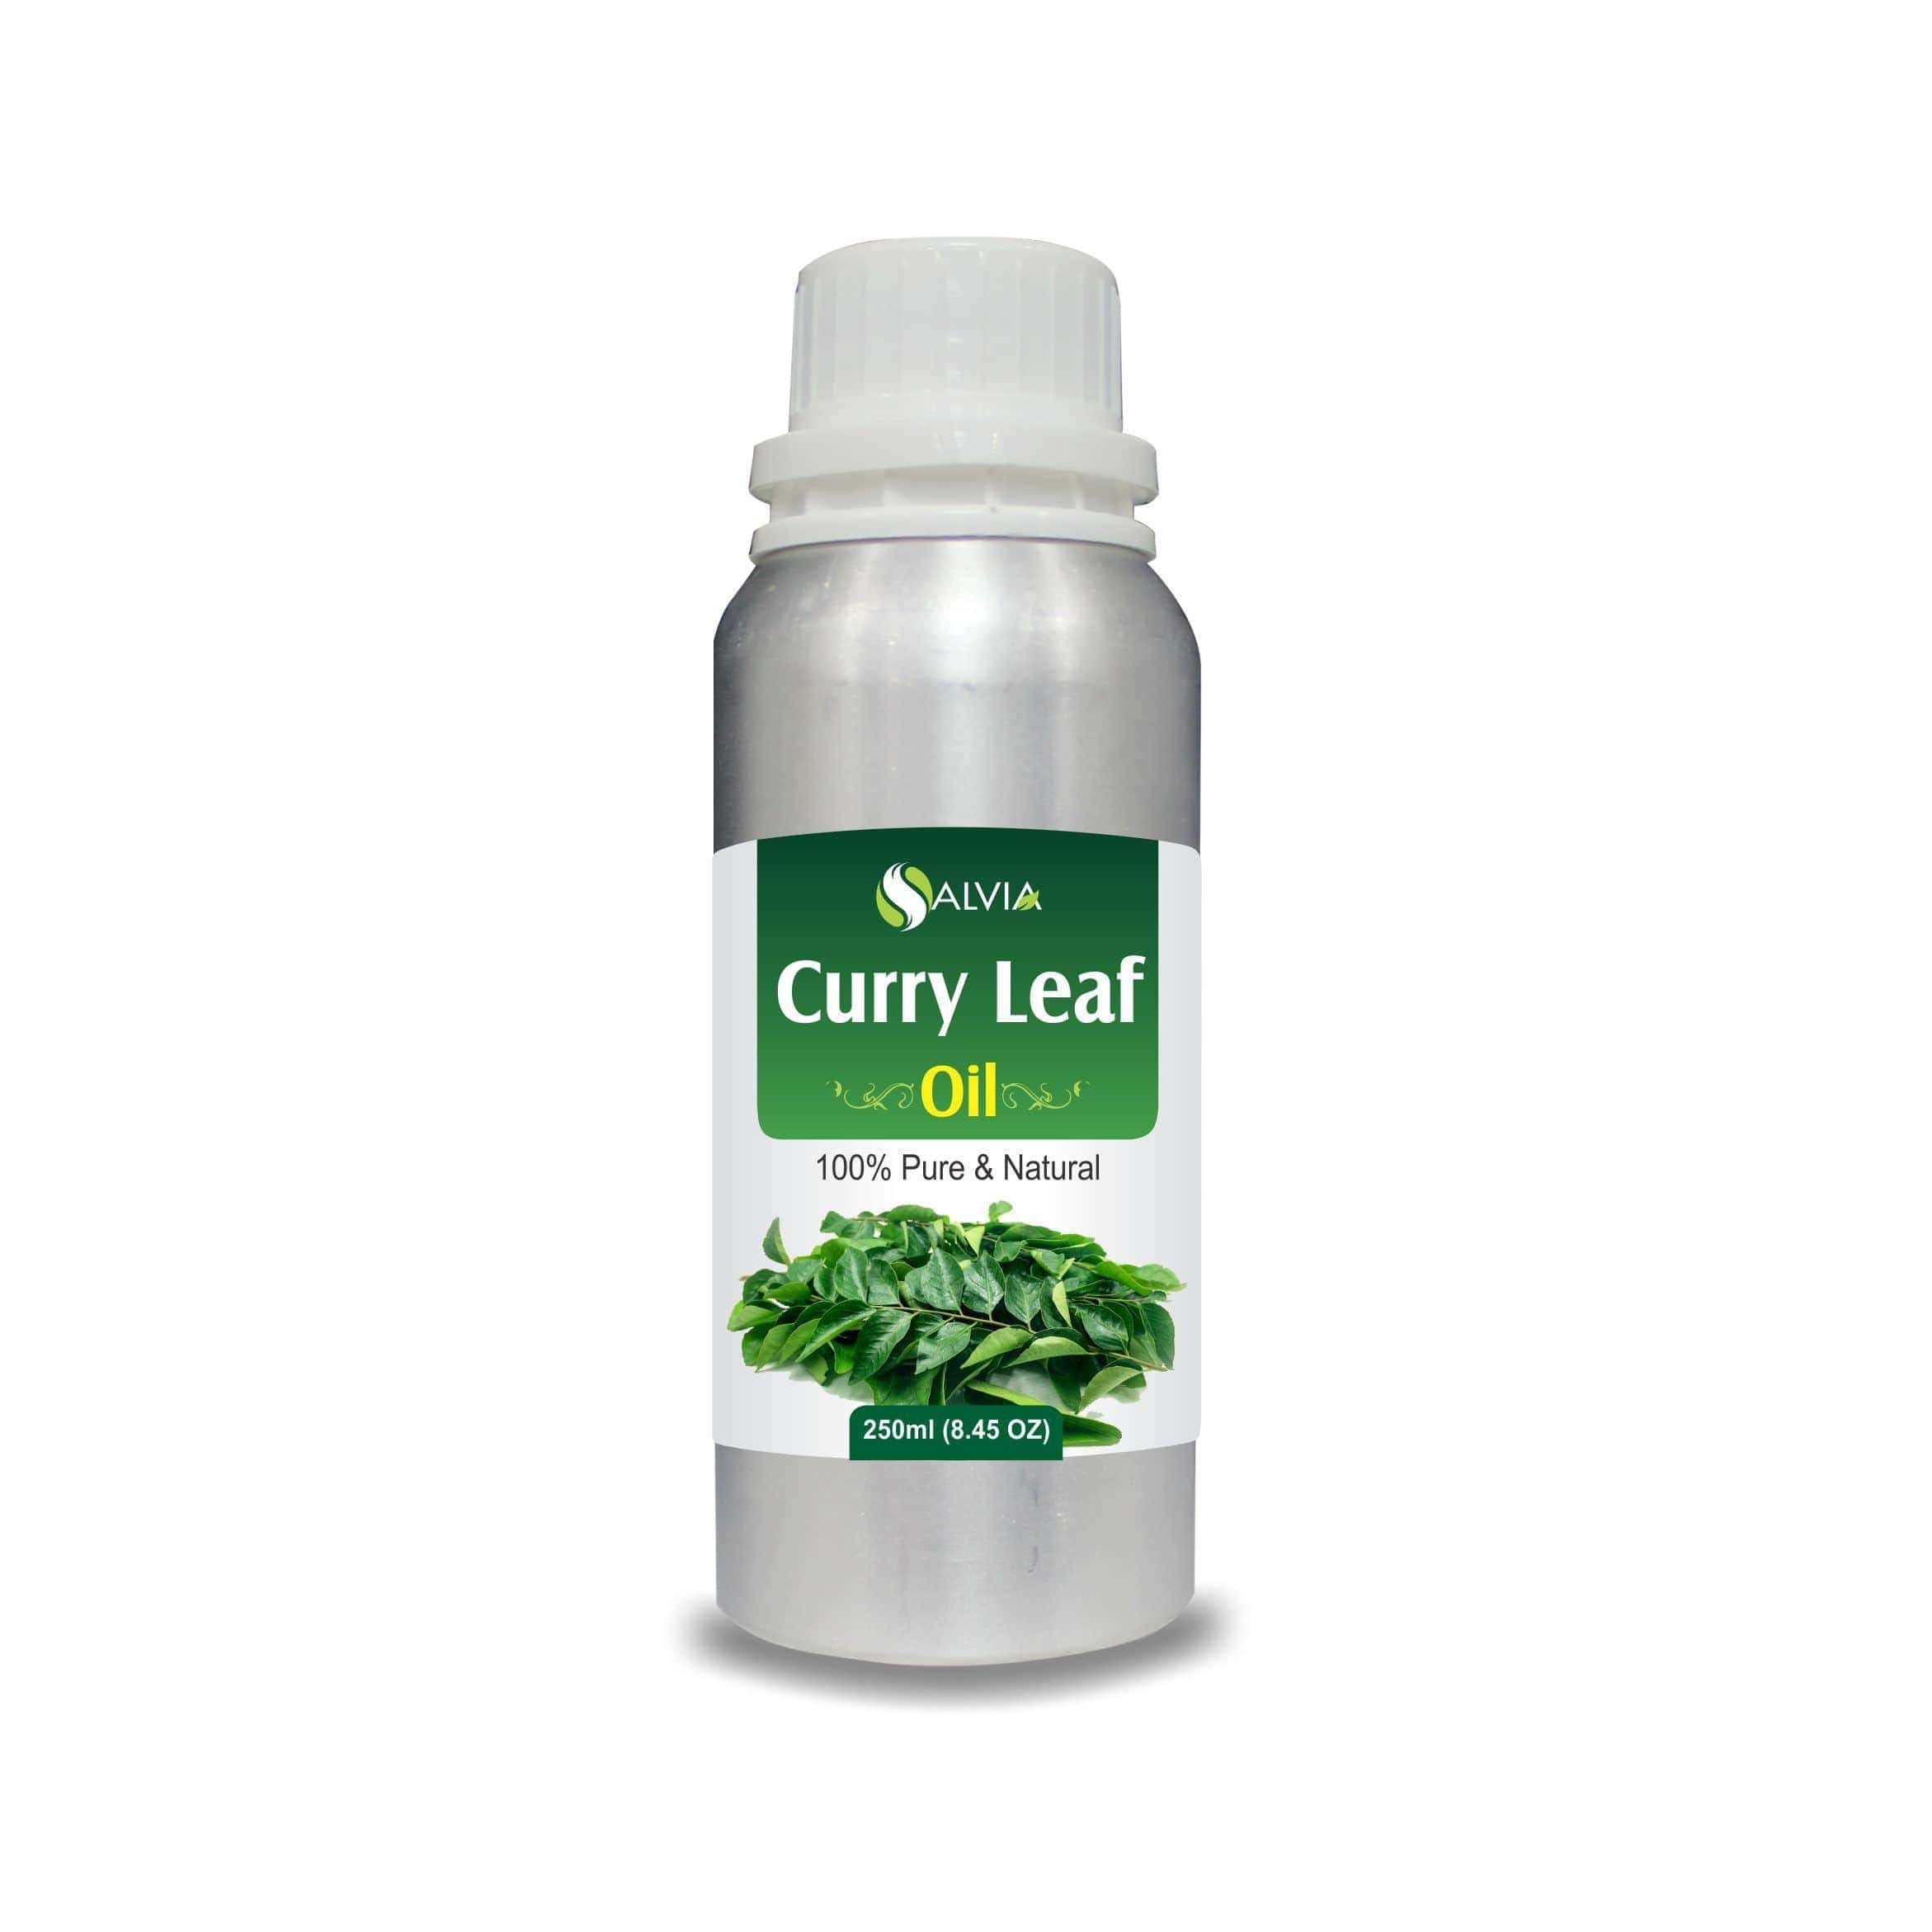 curry leaf oil benefits